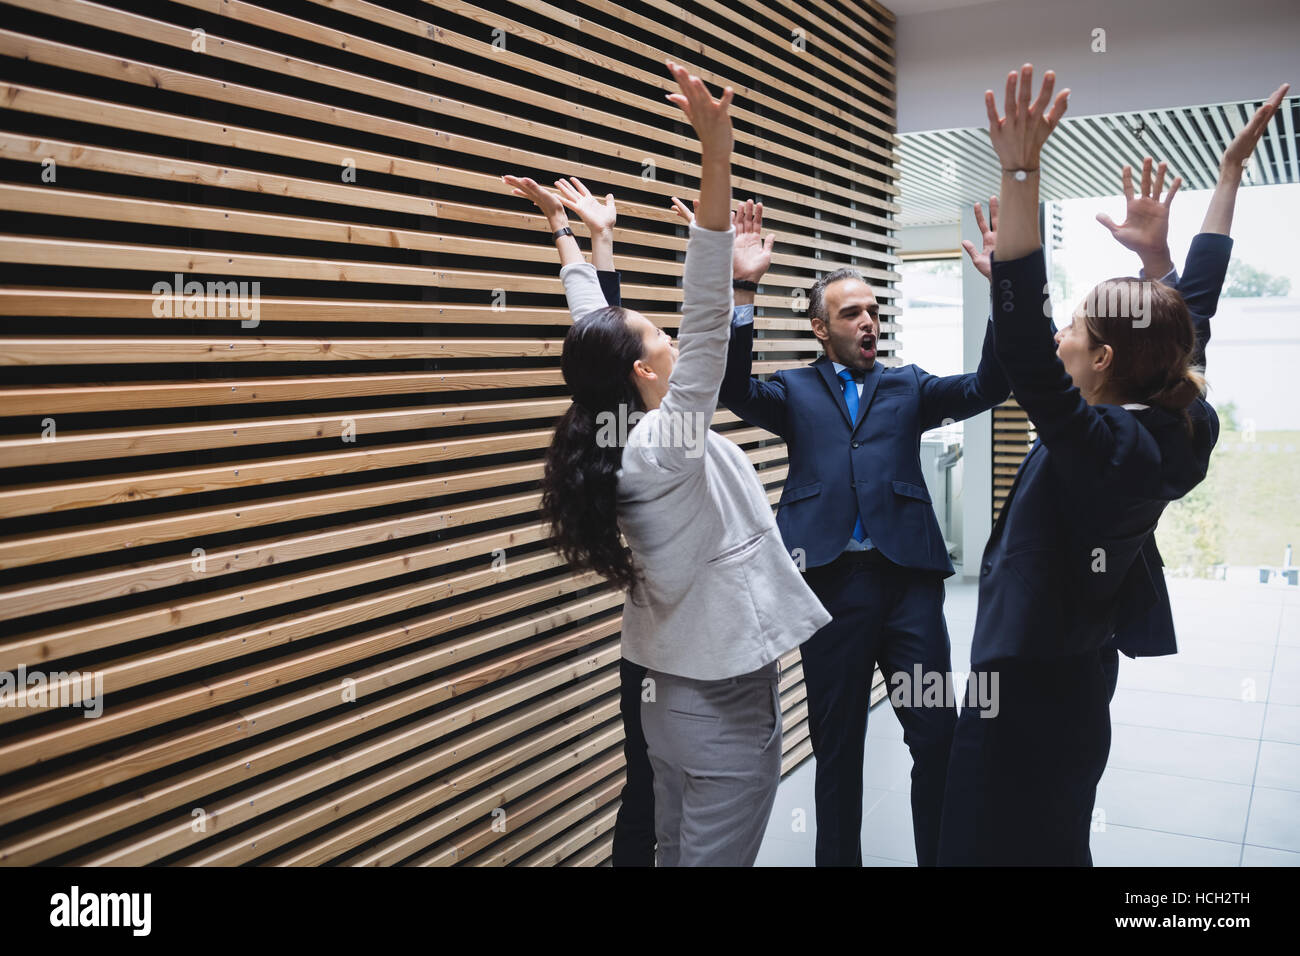 Businesspeople standing with hands raised Stock Photo